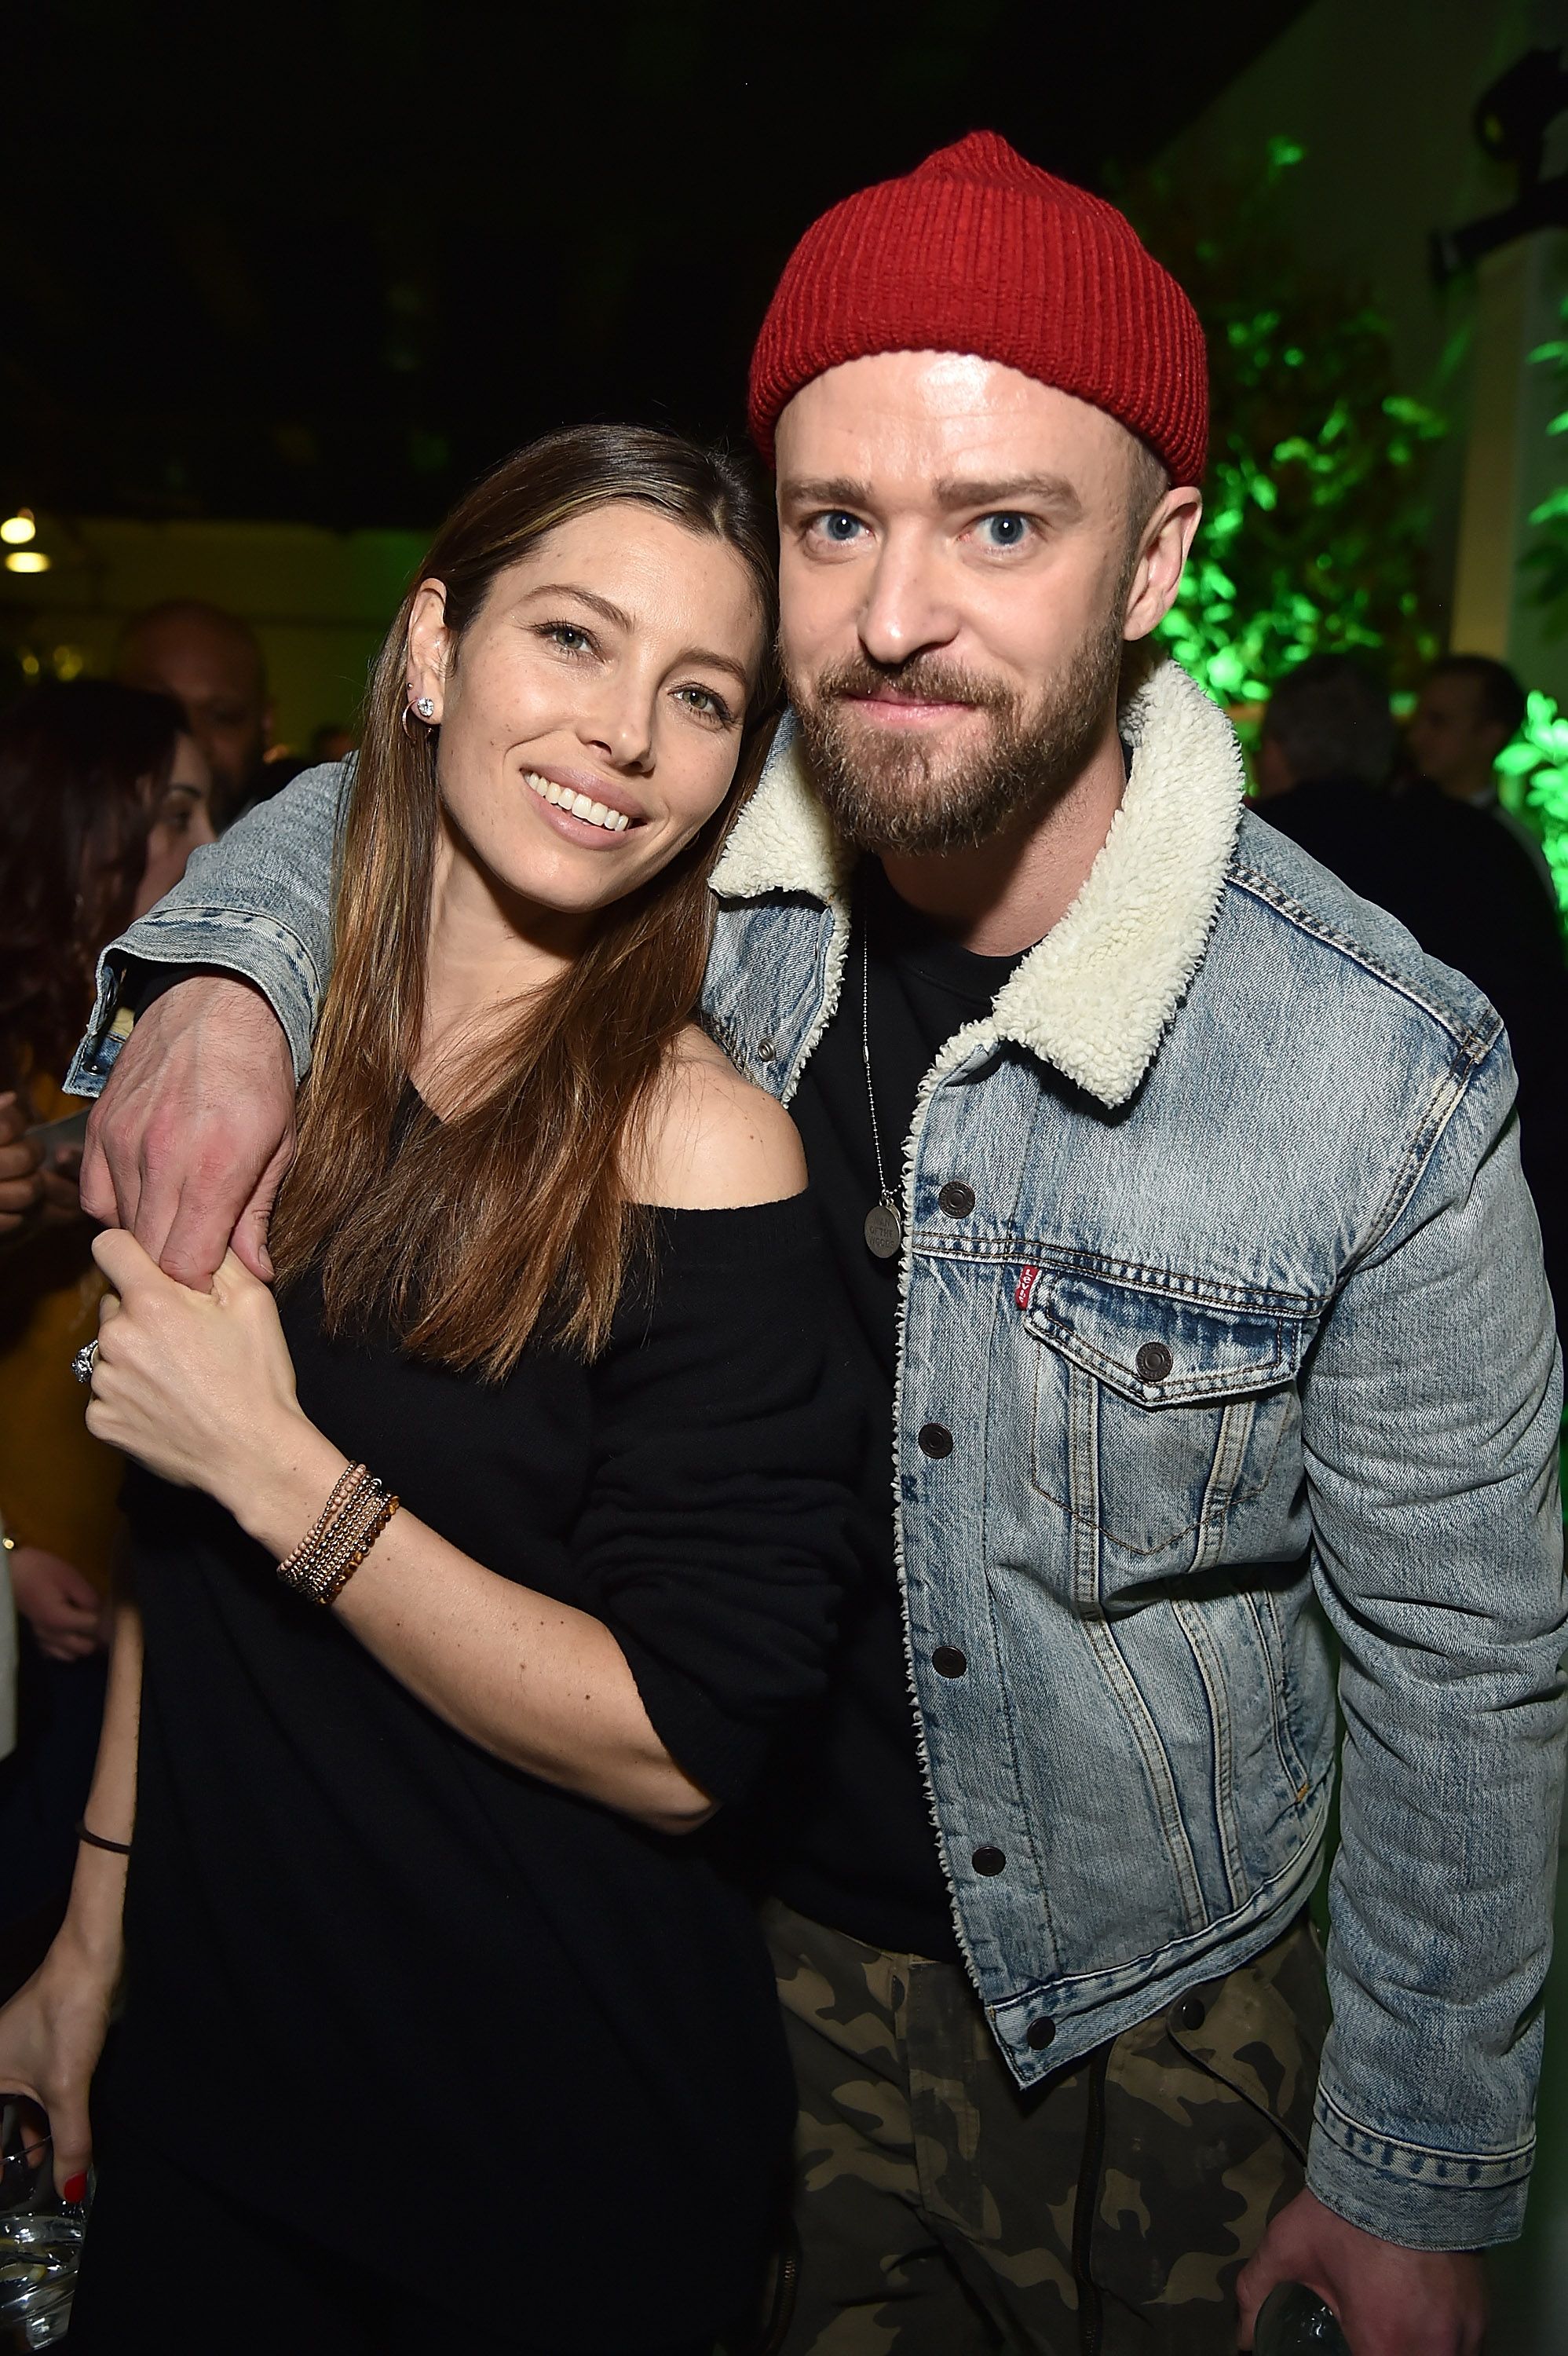 Jessica Biel and Justin Timberlake at the American Express x Justin Timberlake "Man Of The Woods" in New York in 2018 | Source: Getty Images